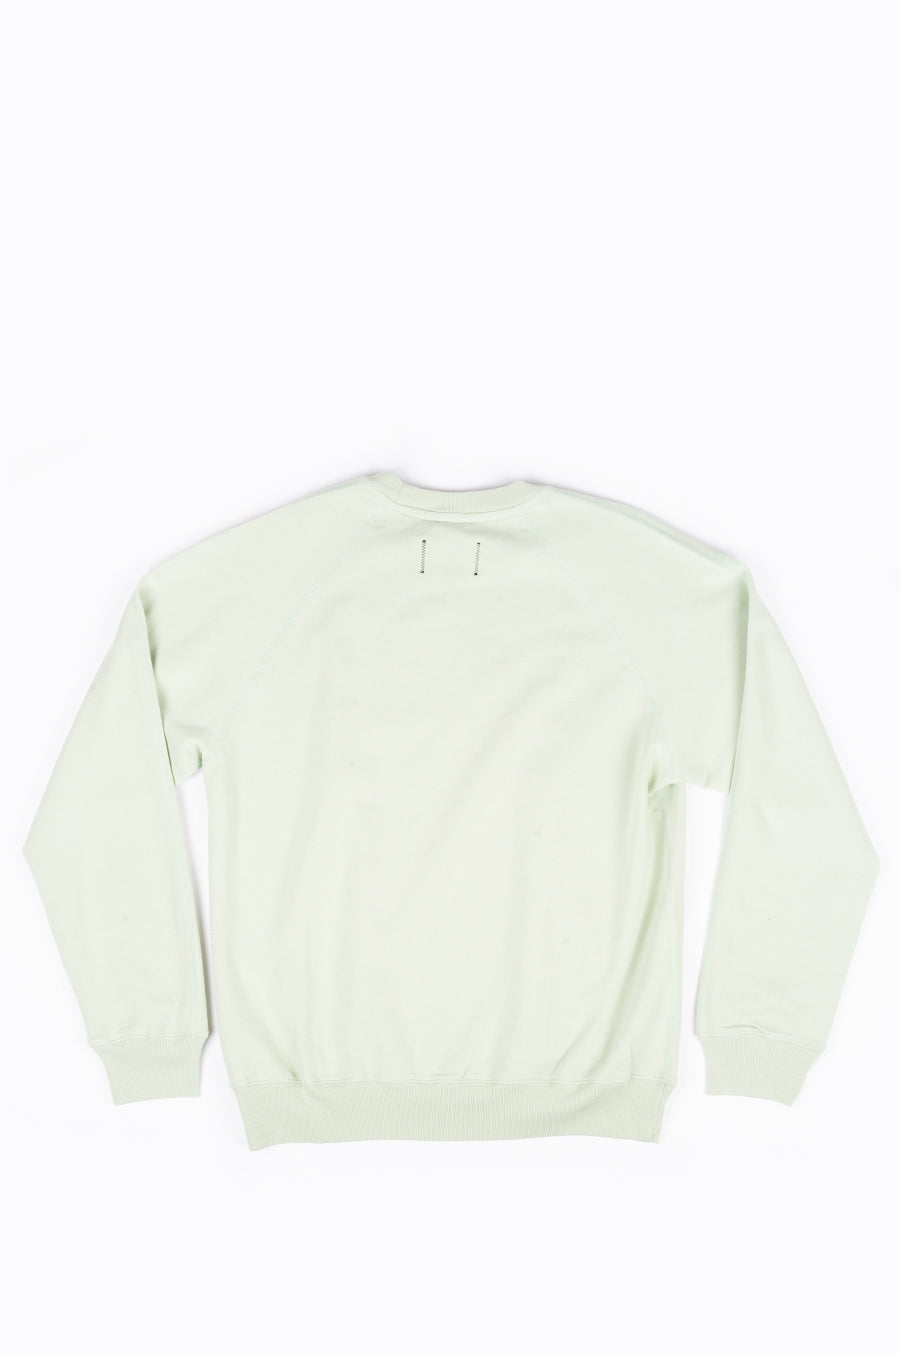 REIGNING CHAMP KNIT LIGHTWEIGHT TERRY RELAXED FIT CREWNECK CACTUS